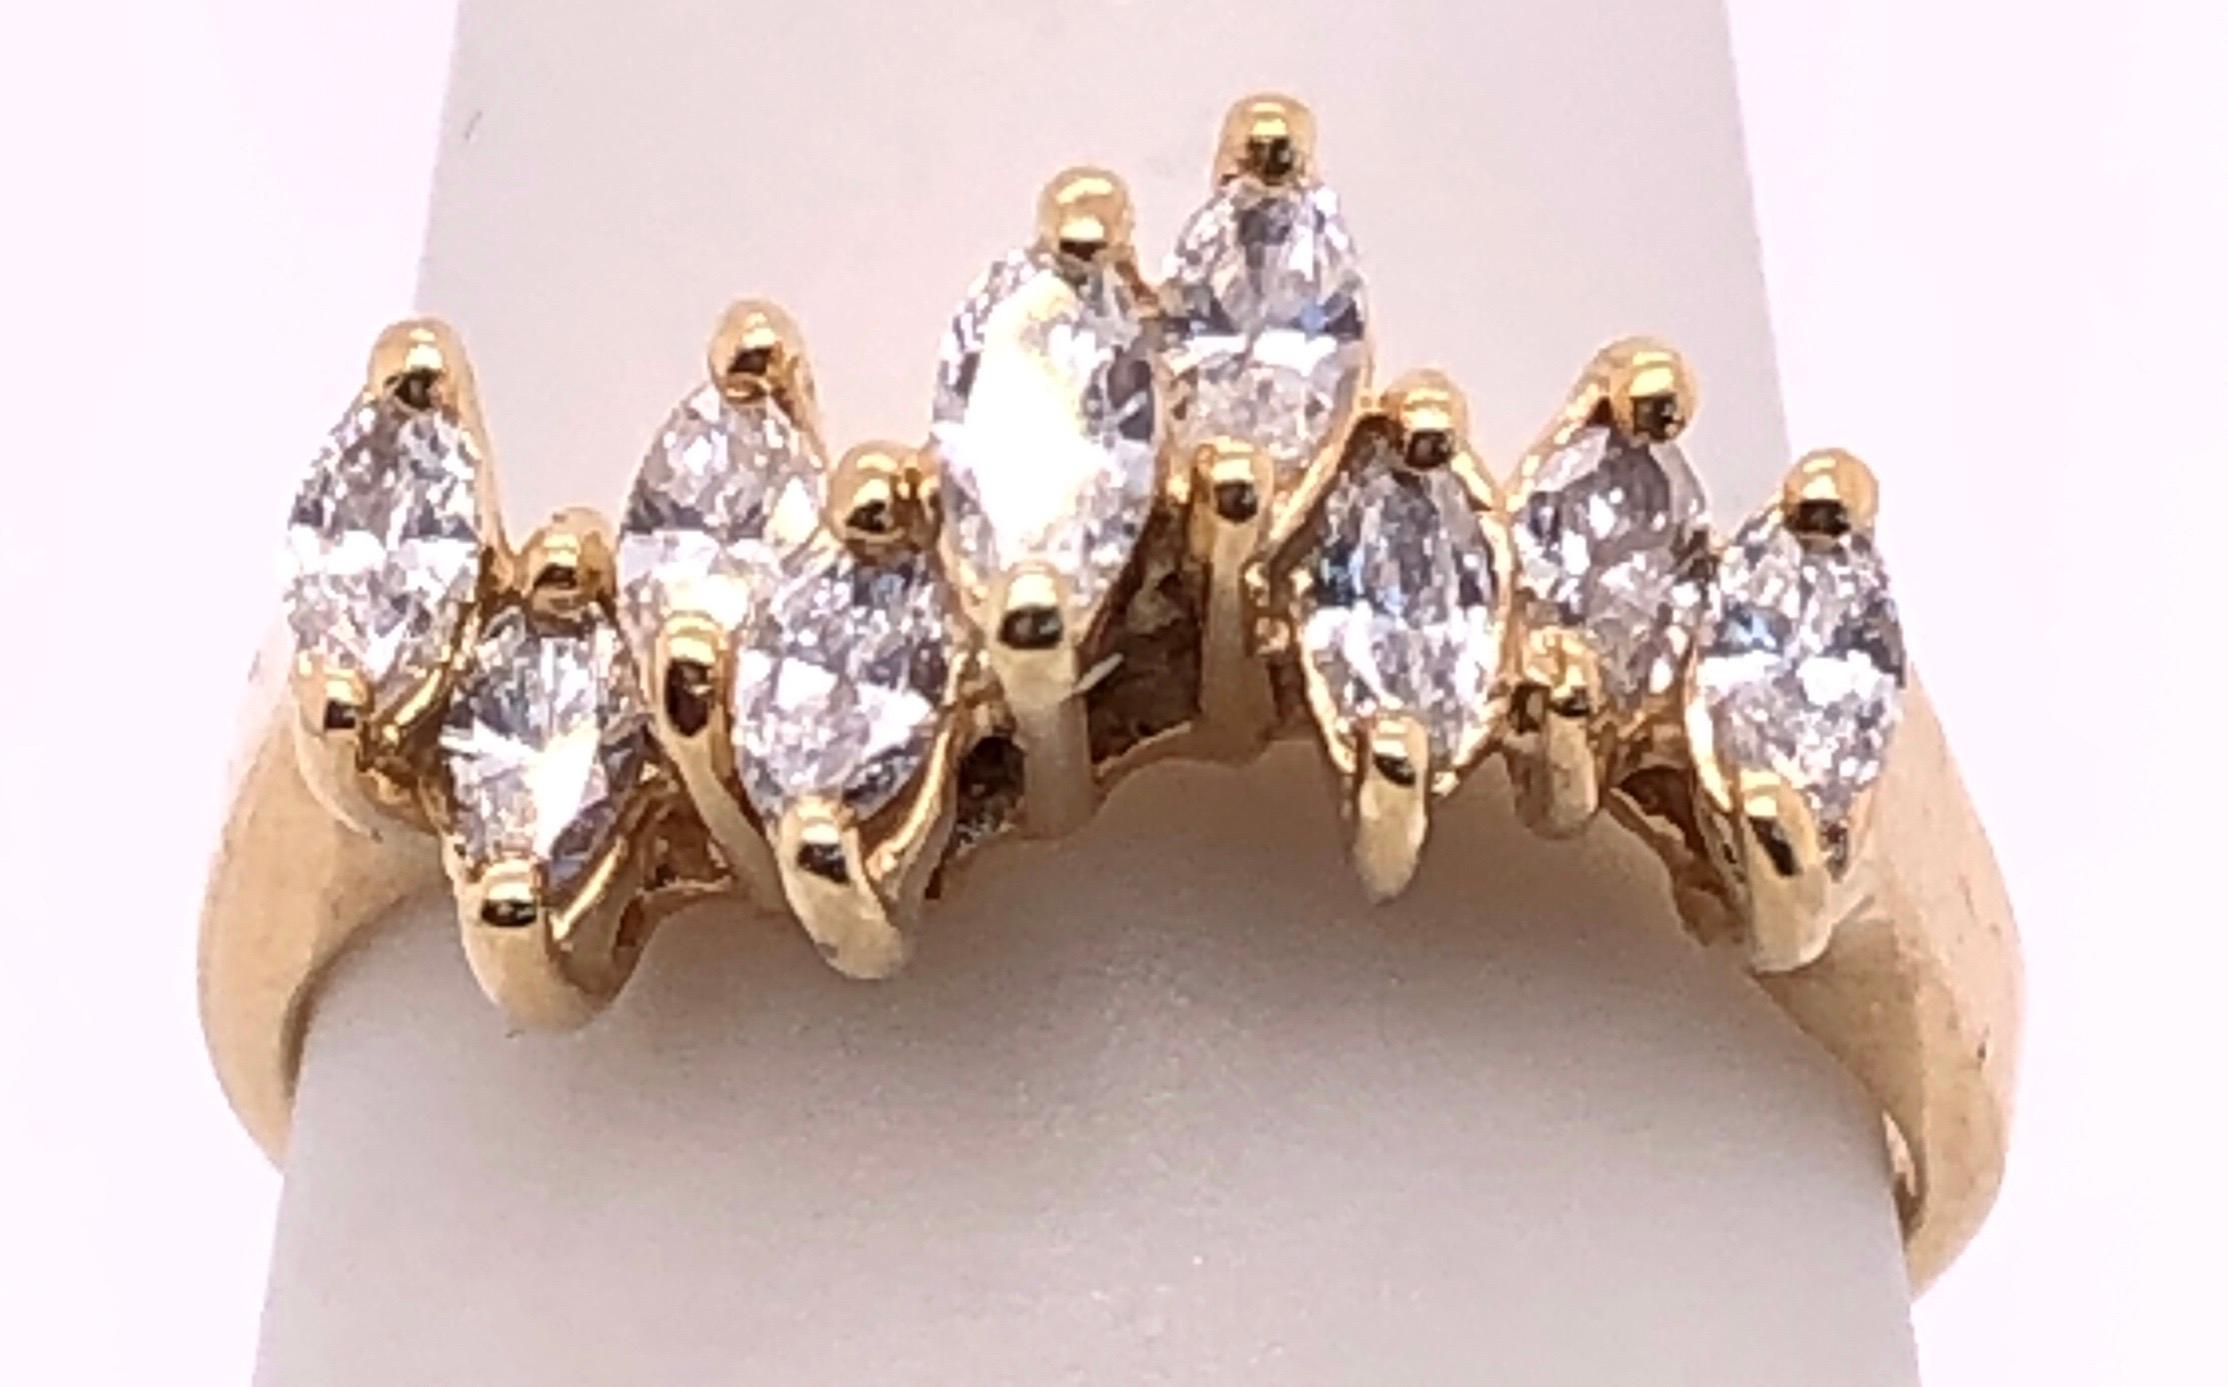 14 Karat Yellow Gold Wedding Bridal Ring with Marquise Diamonds Size 5.
1.00 total diamond weight.
3 grams total weight.